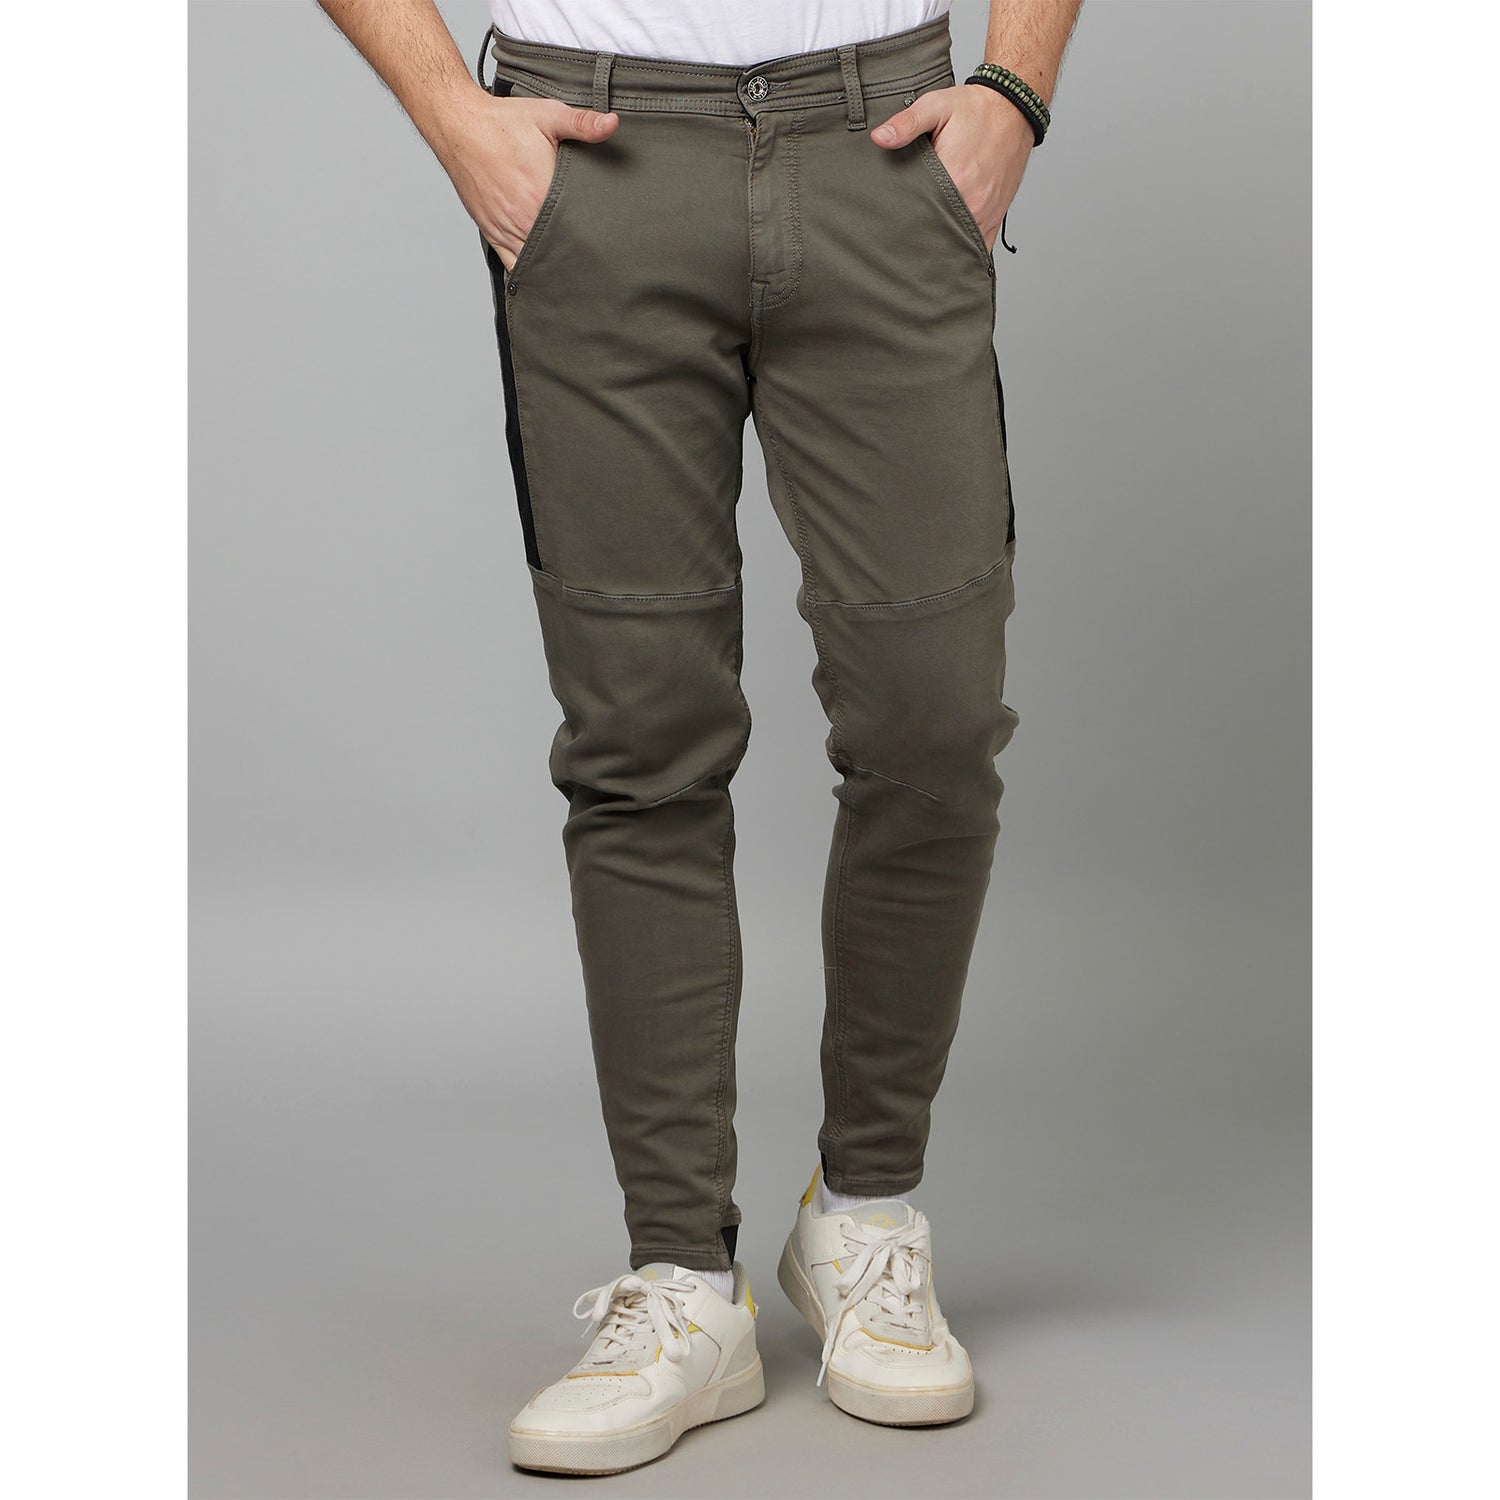 Green Skinny Fit Low Distress Stretchable Cotton Jeans (FOBIKE)